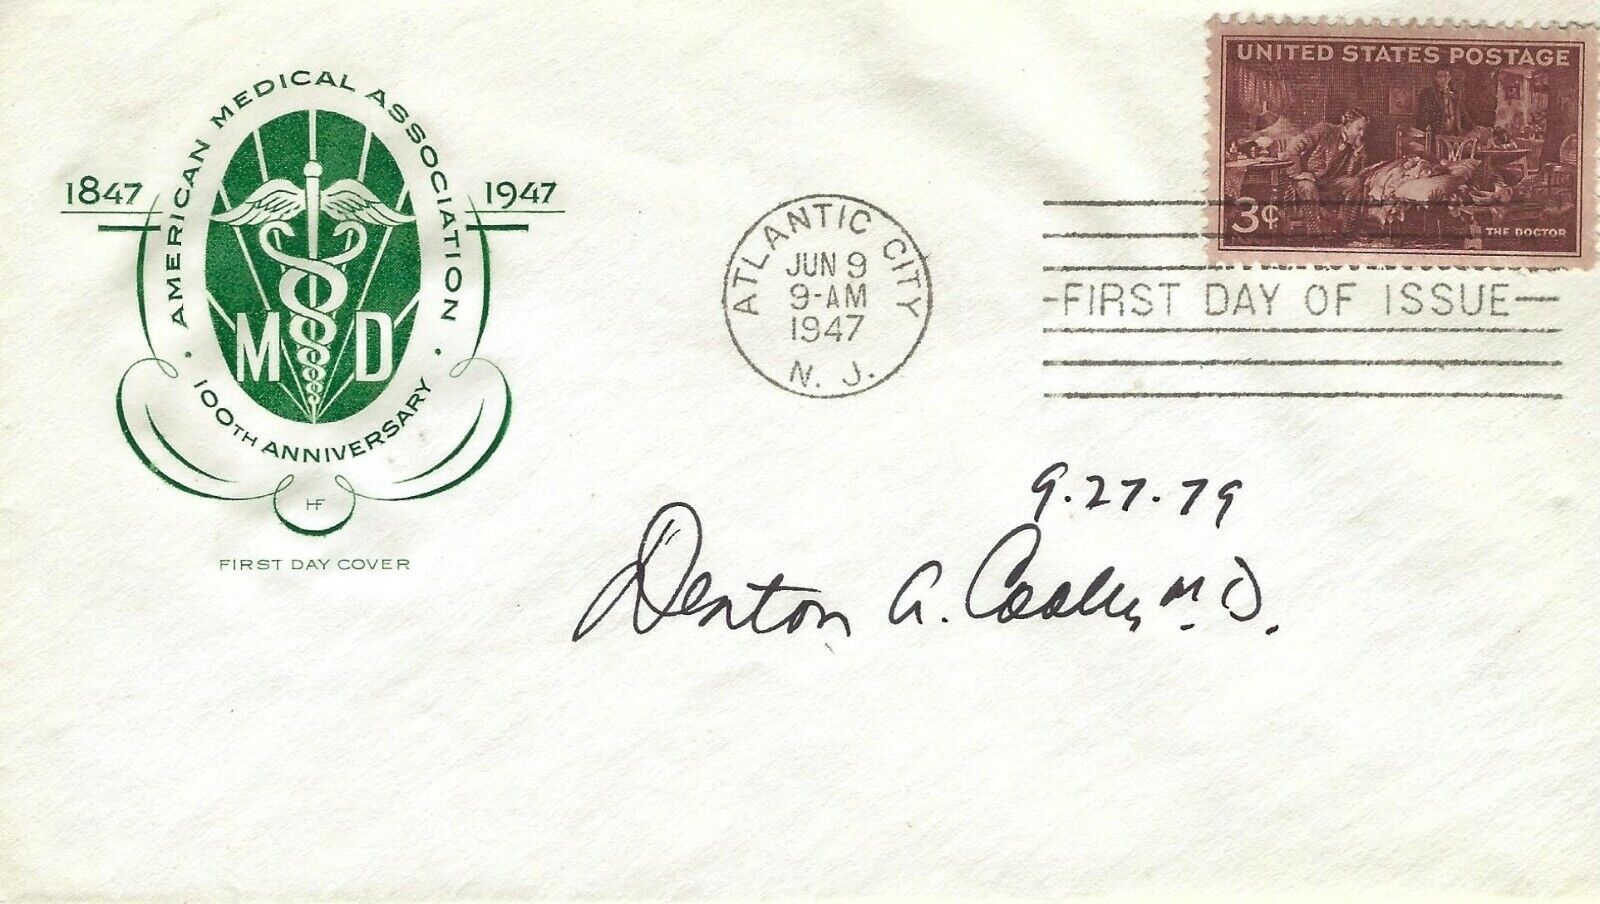 Denton Cooley signed Medical Assoc. FDC Surgeon 1st Implant of Artificial Heart